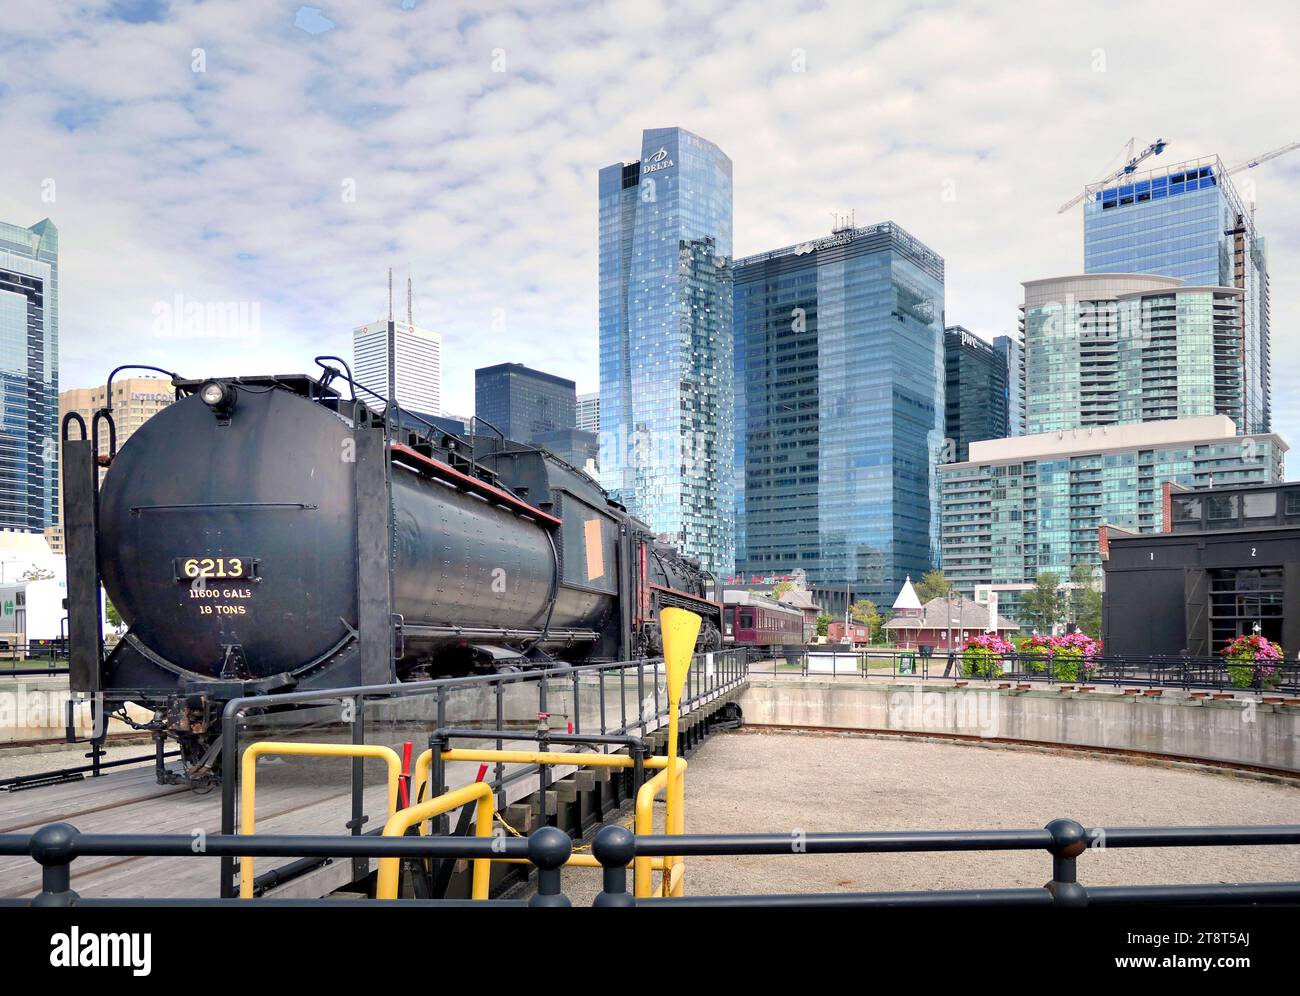 Toronto Railway Museum, Roundhouse Park is a 17 acre (6.9 ha) park in Downtown Toronto in the former Railway Lands. It features the John Street Roundhouse, a preserved locomotive roundhouse which is home to the Toronto Railway Museum, Steam Whistle Brewing, and the restaurant and entertainment complex The Rec Room. The park is also home to a collection of trains, the former Canadian Pacific Railway Don Station, and the Roundhouse Park Miniature Railway. The park is bounded by Bremner Boulevard, Lower Simcoe Street, Lake Shore Boulevard West/Gardiner Expressway and Rees Street Stock Photo